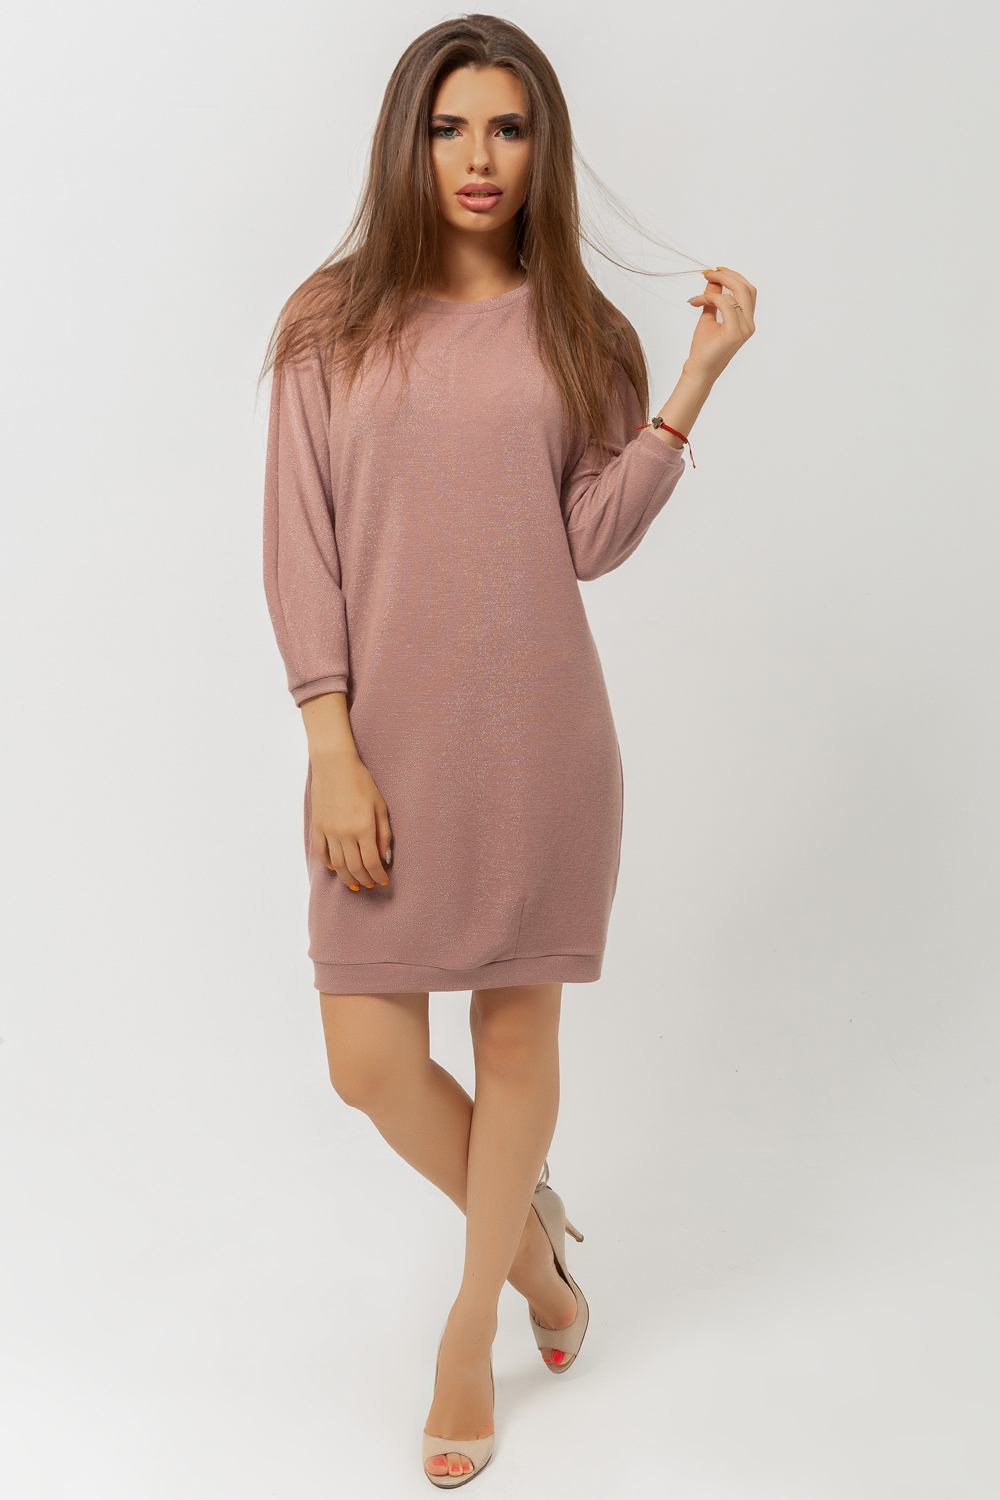 Knitted dress in cappuccino colour